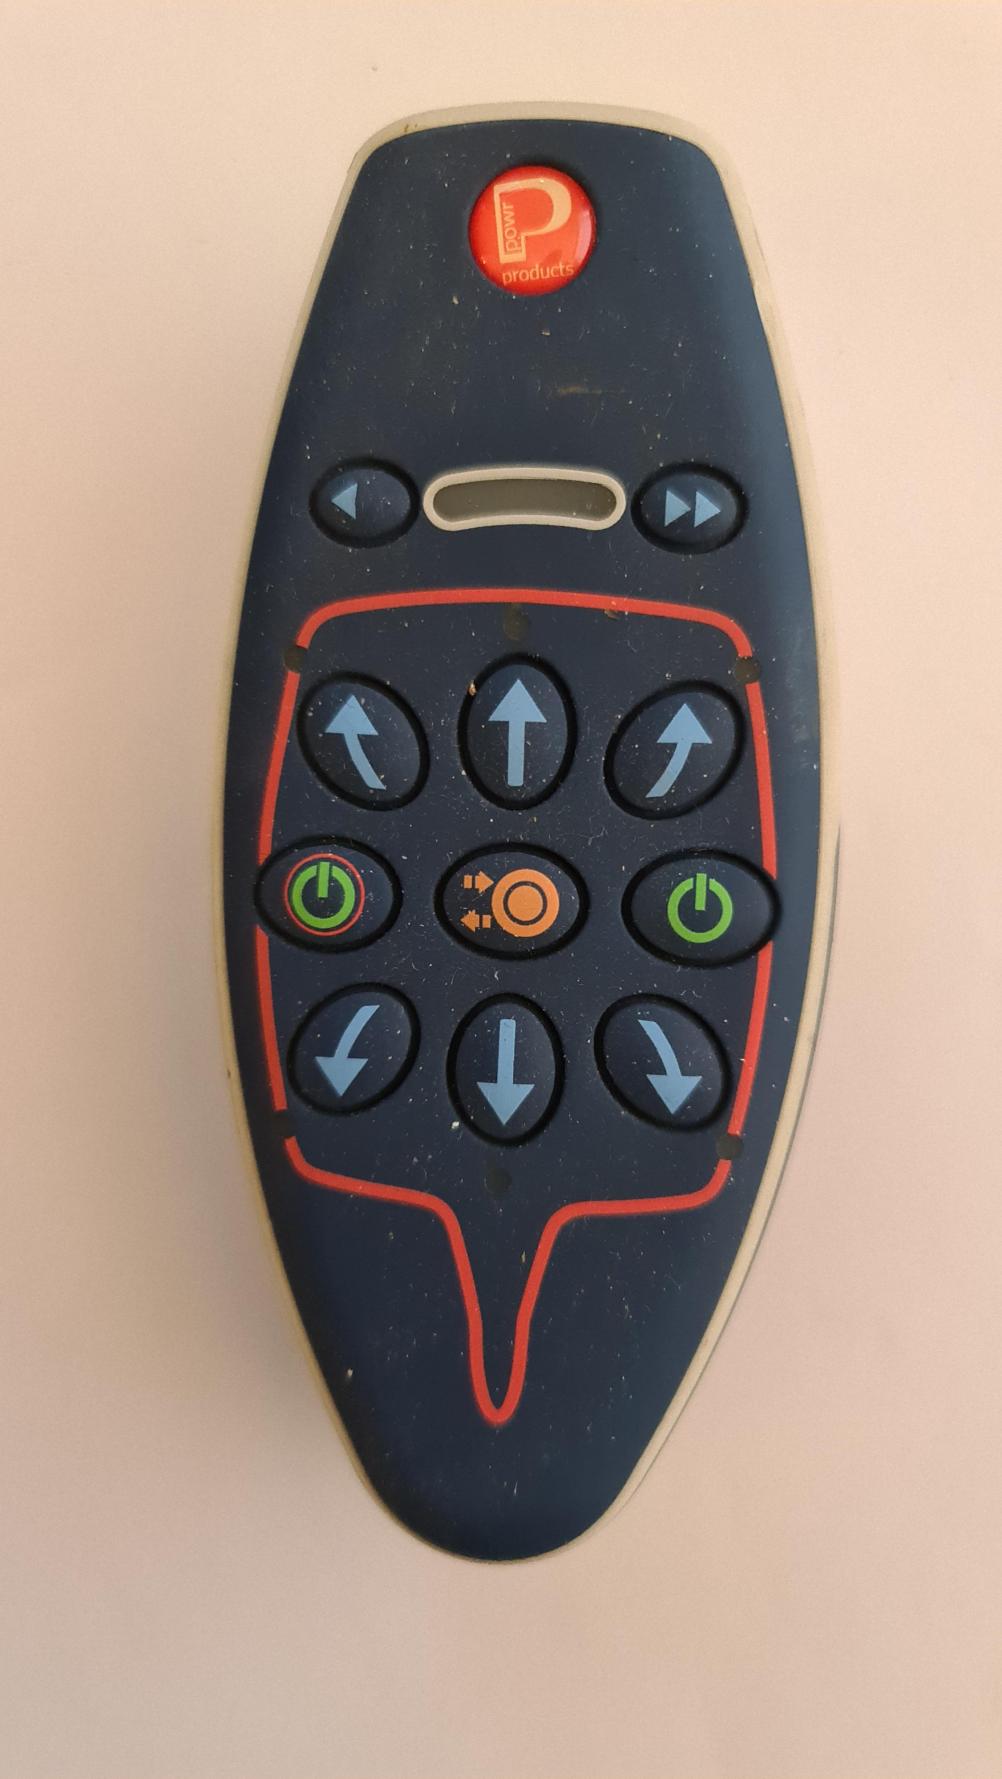 Powertouch 10163-002-13 Remote Control - Front Image